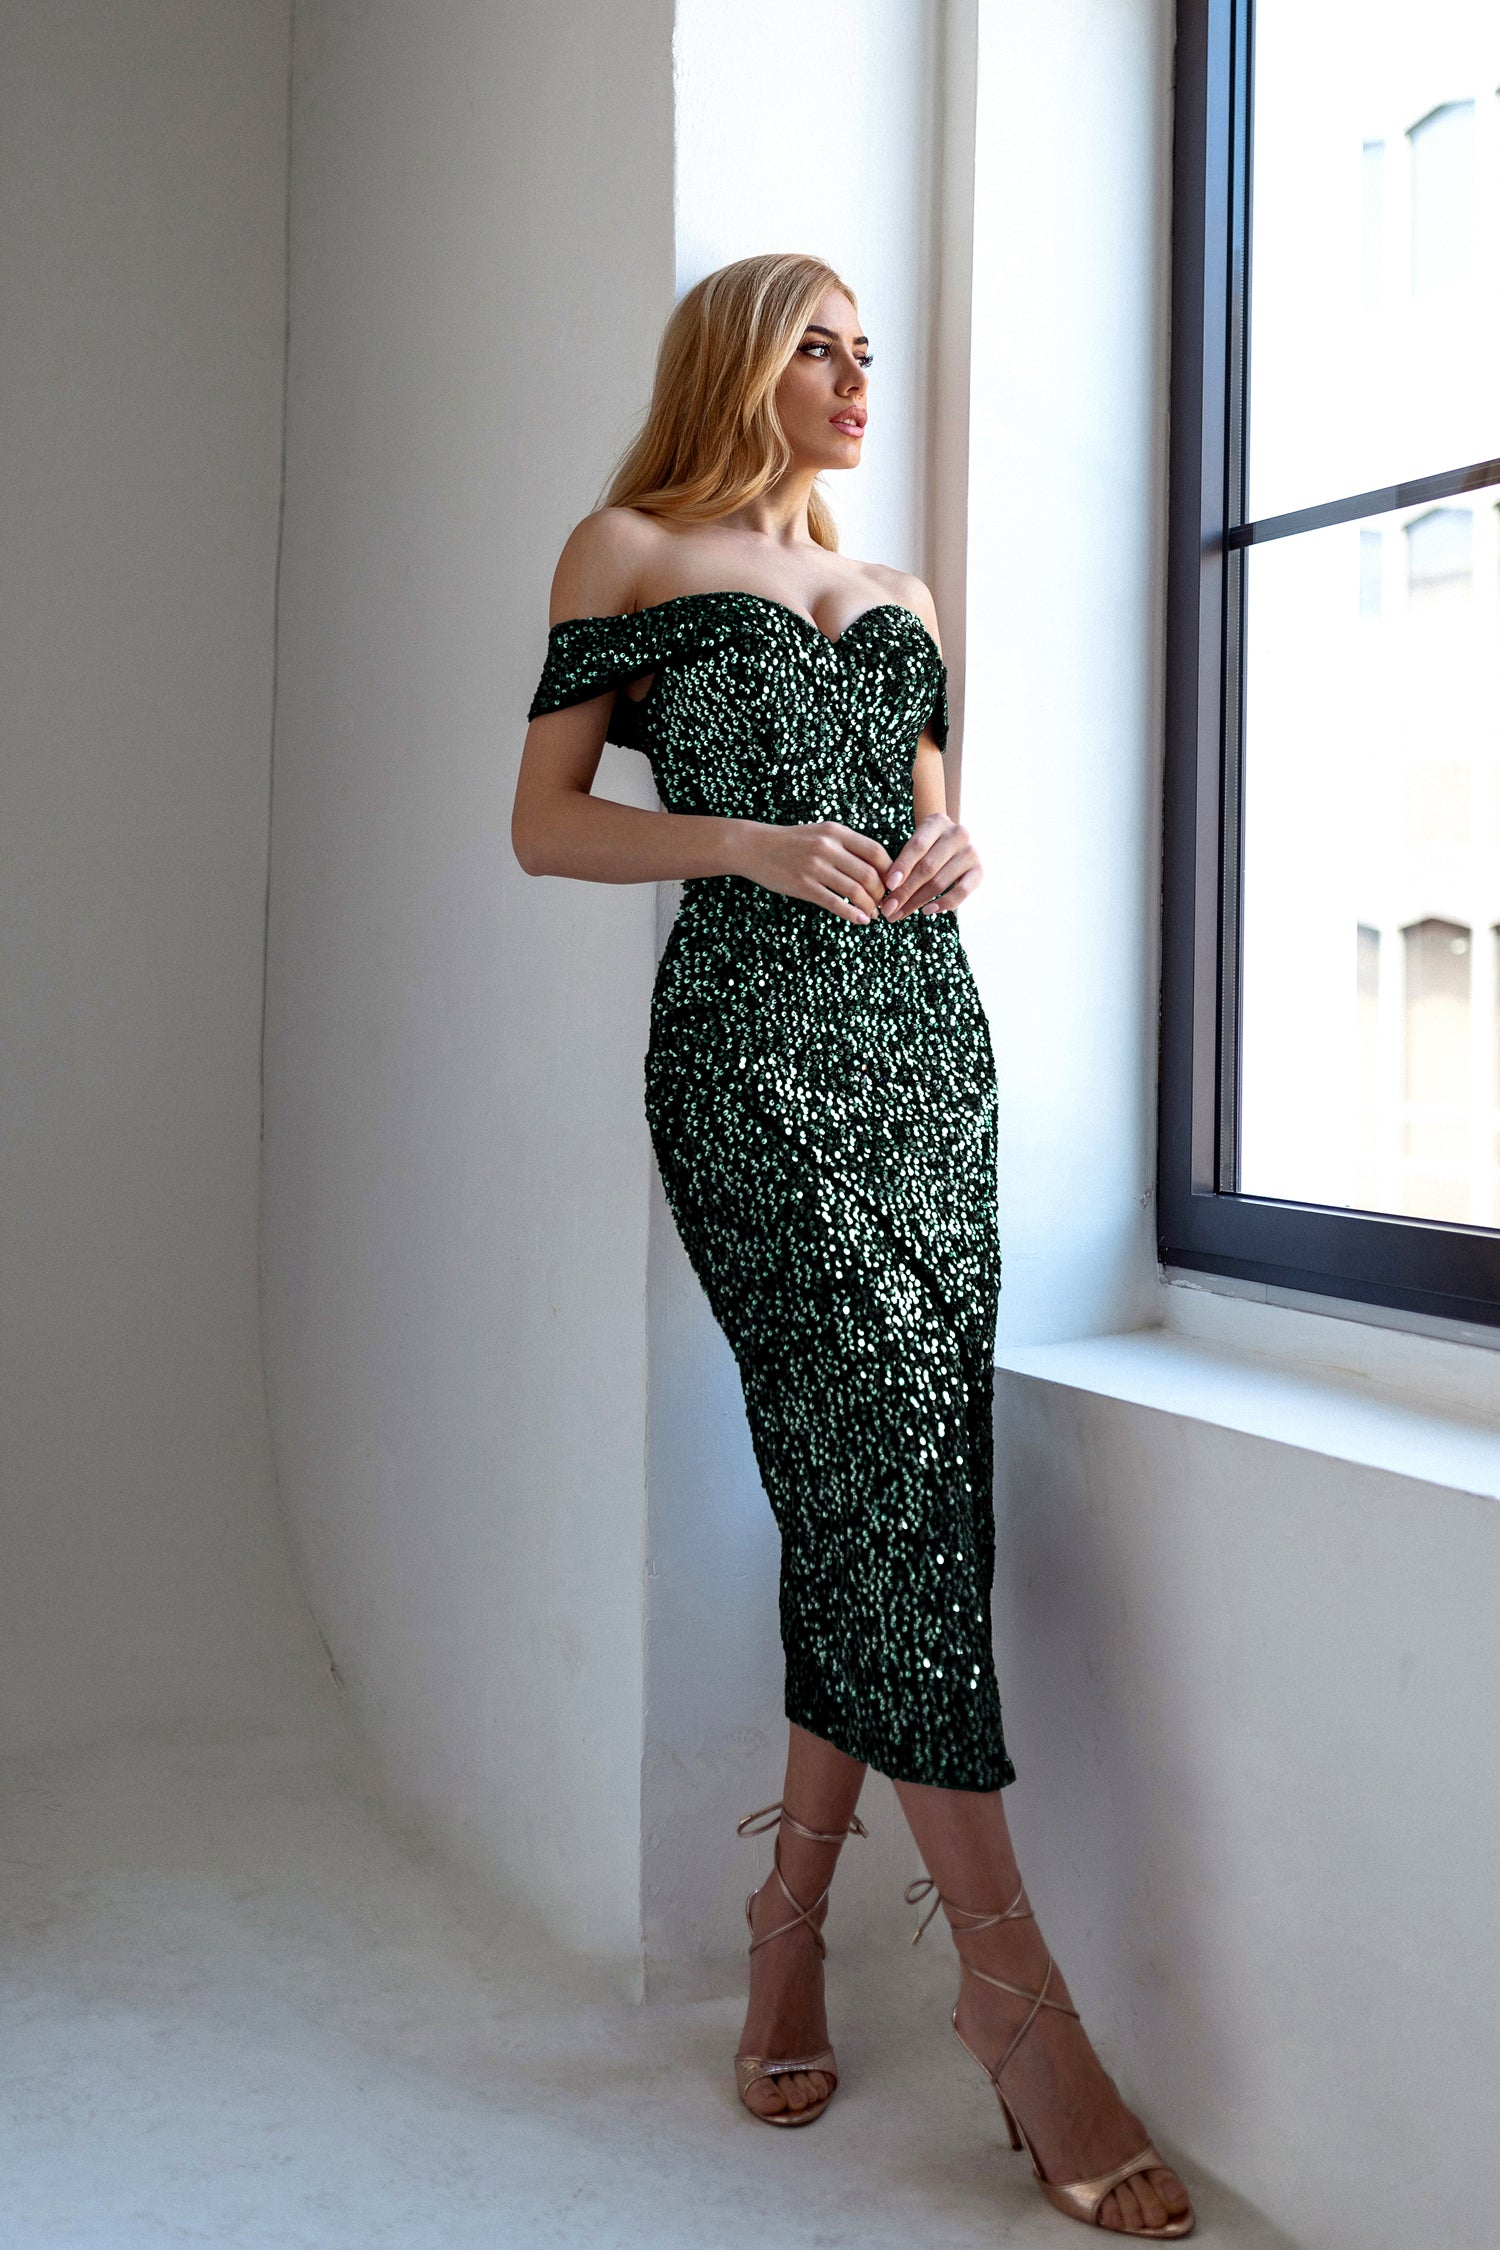 Tina Holly Couture TK271 Emerald Sequins Off Shoulder Midi Dress features With Sweetheart Neckline and Leg Spilt Formal Dress